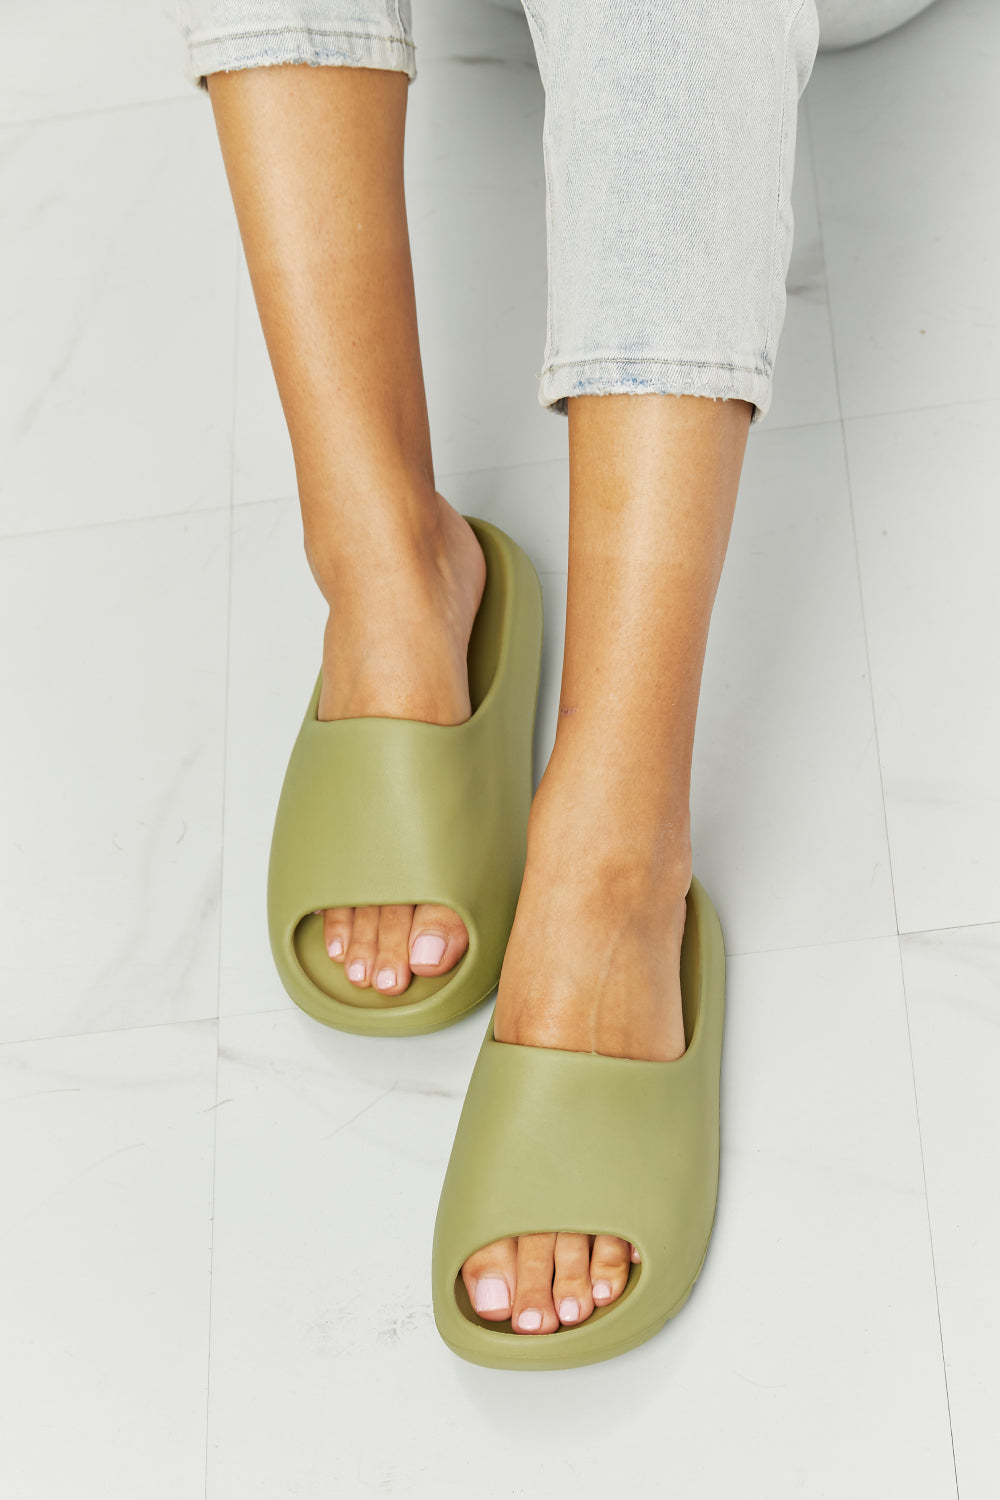 NOOK JOI In My Comfort Zone Slides in Green-Shoes-Inspired by Justeen-Women's Clothing Boutique in Chicago, Illinois